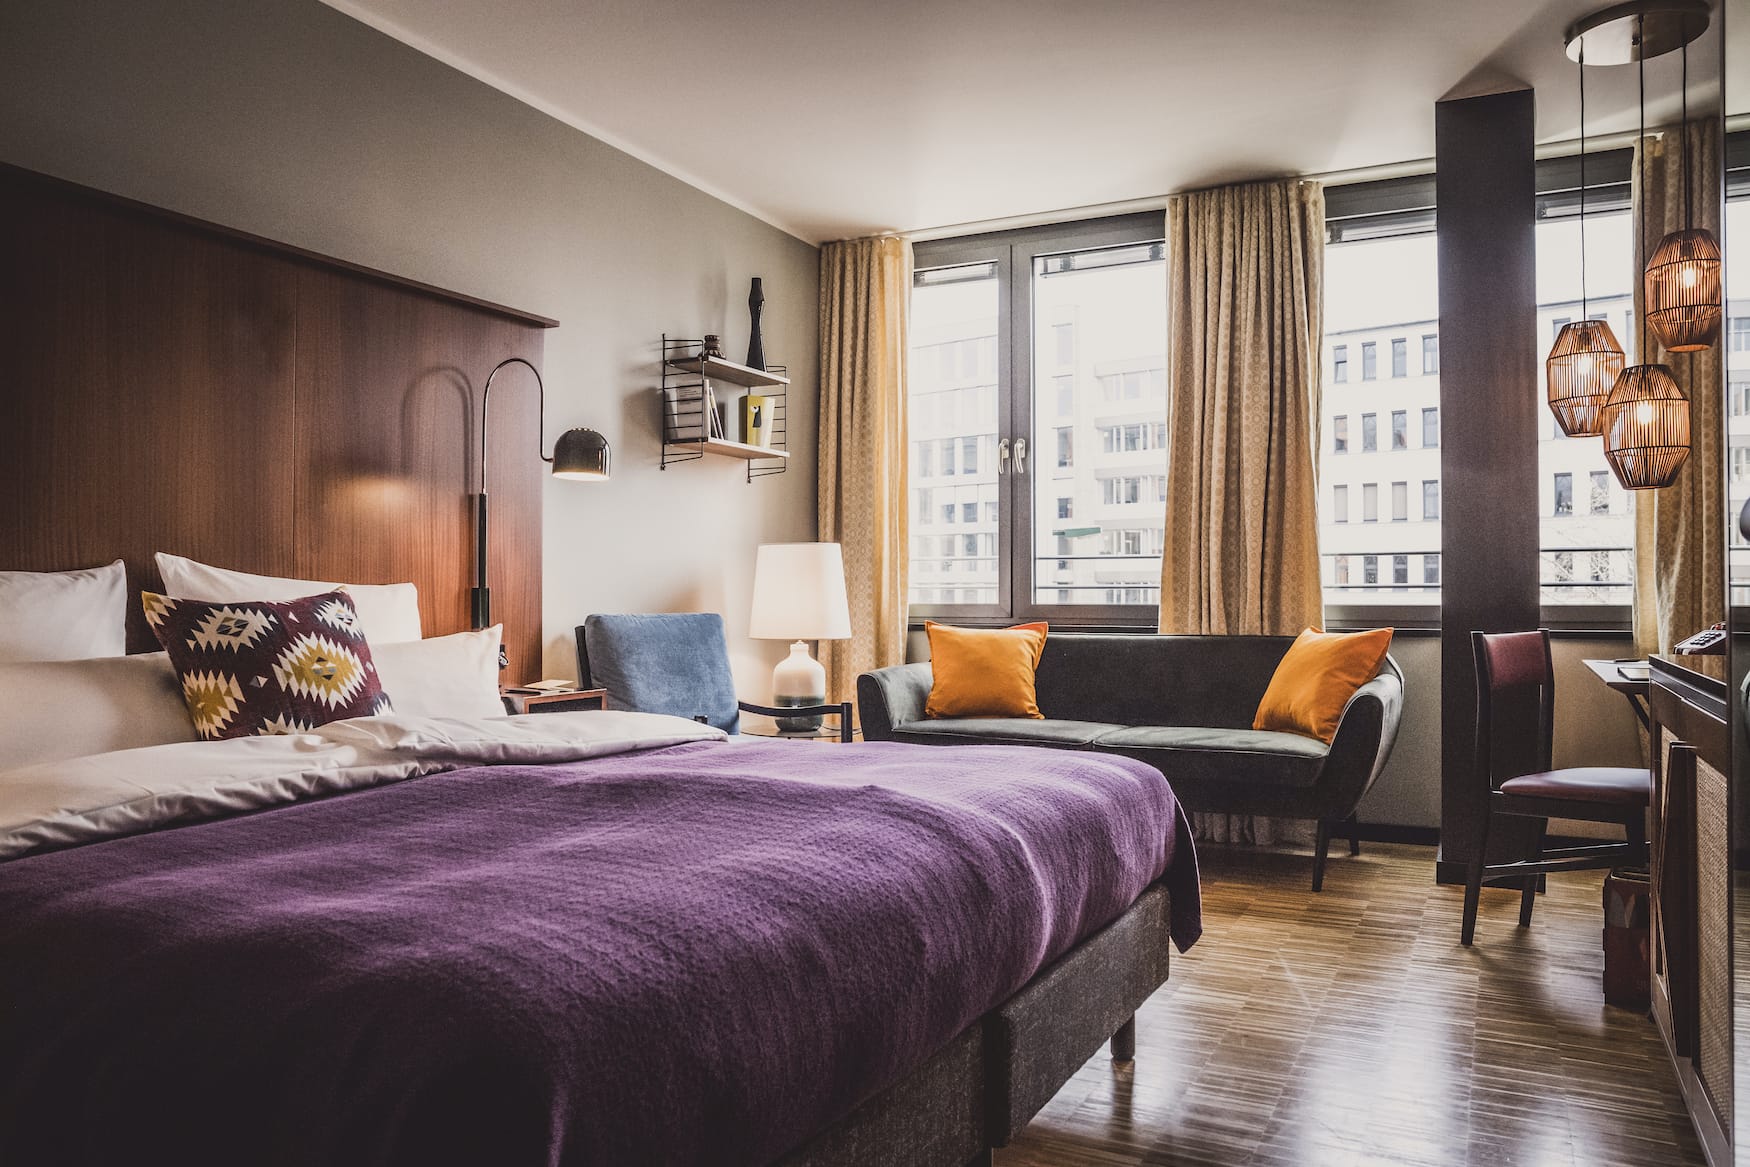 Hotel rooms with a vintage look: Welcome to Hotel Henri in Düsseldorf